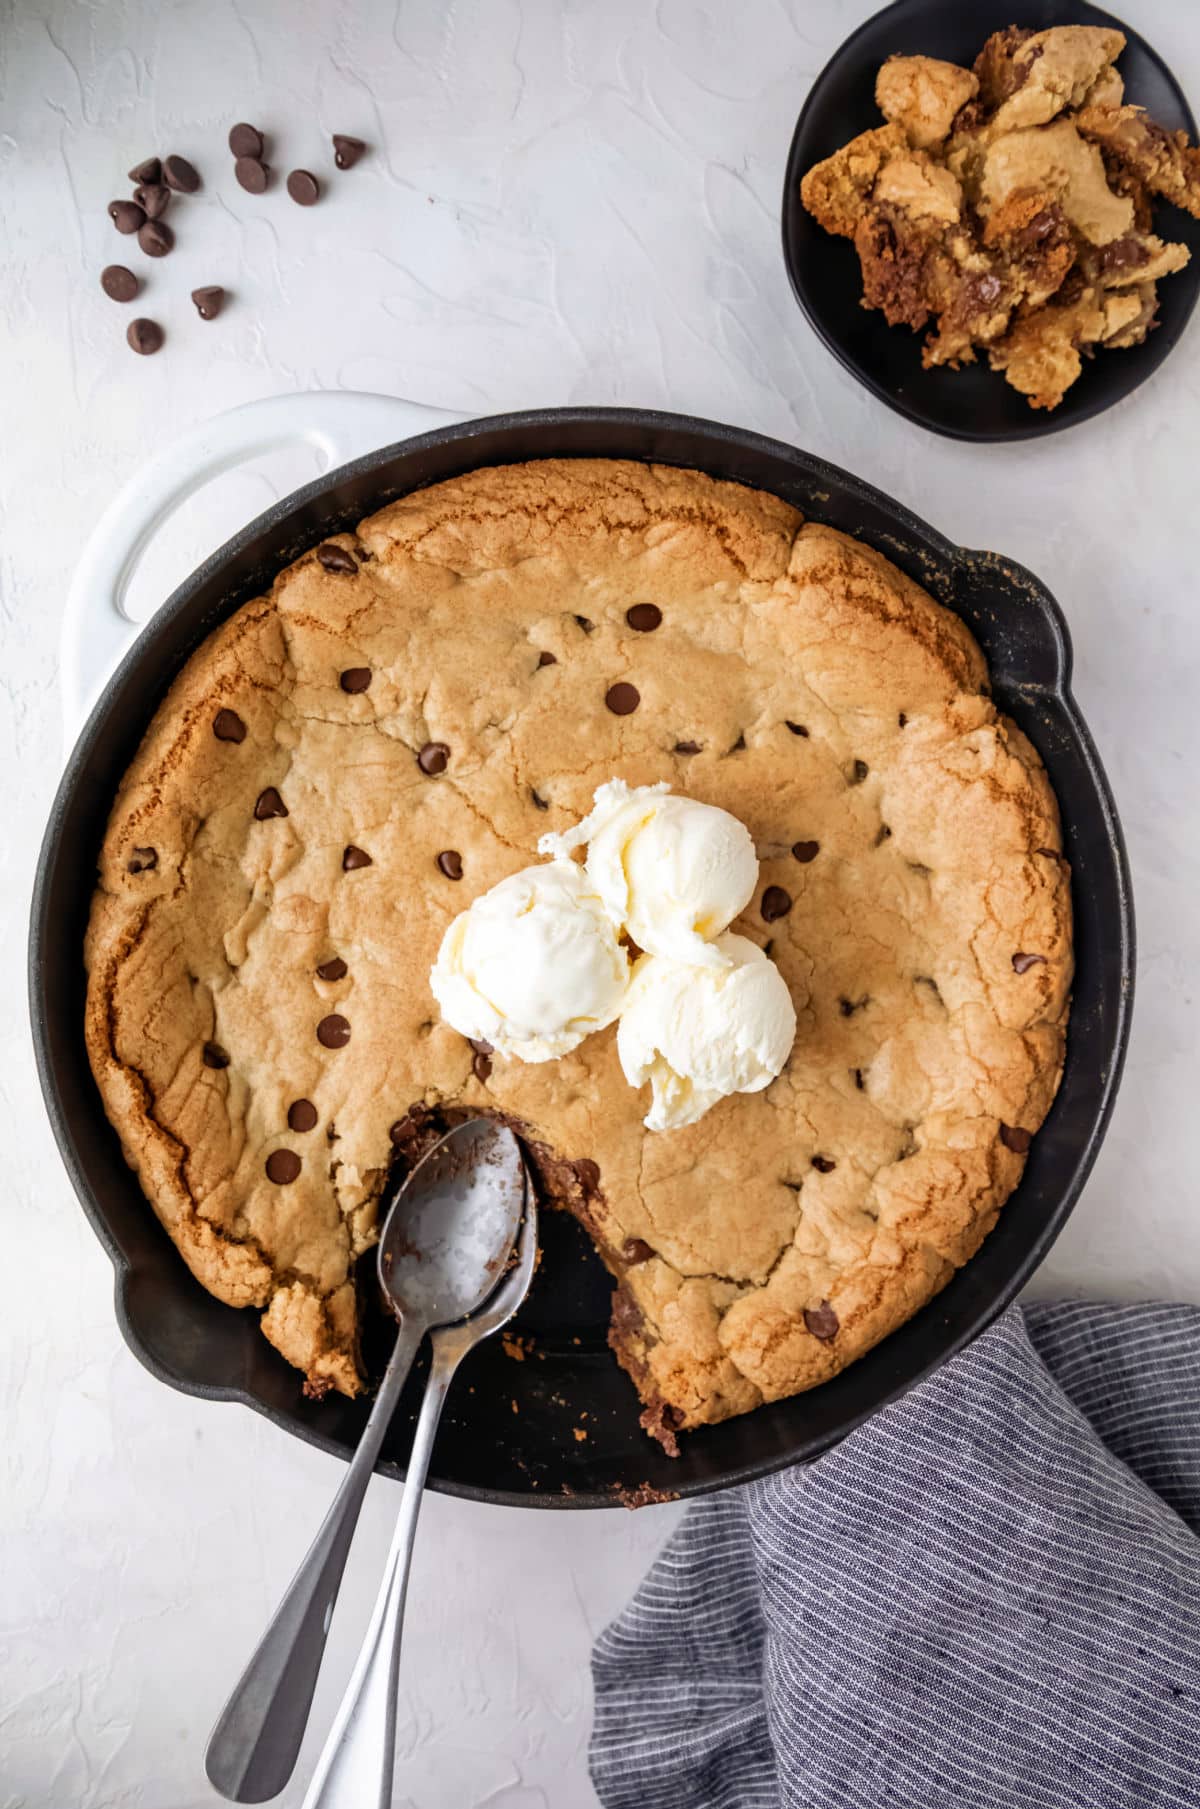 https://www.ihearteating.com/wp-content/uploads/2022/08/pizookie-9-1200.jpg